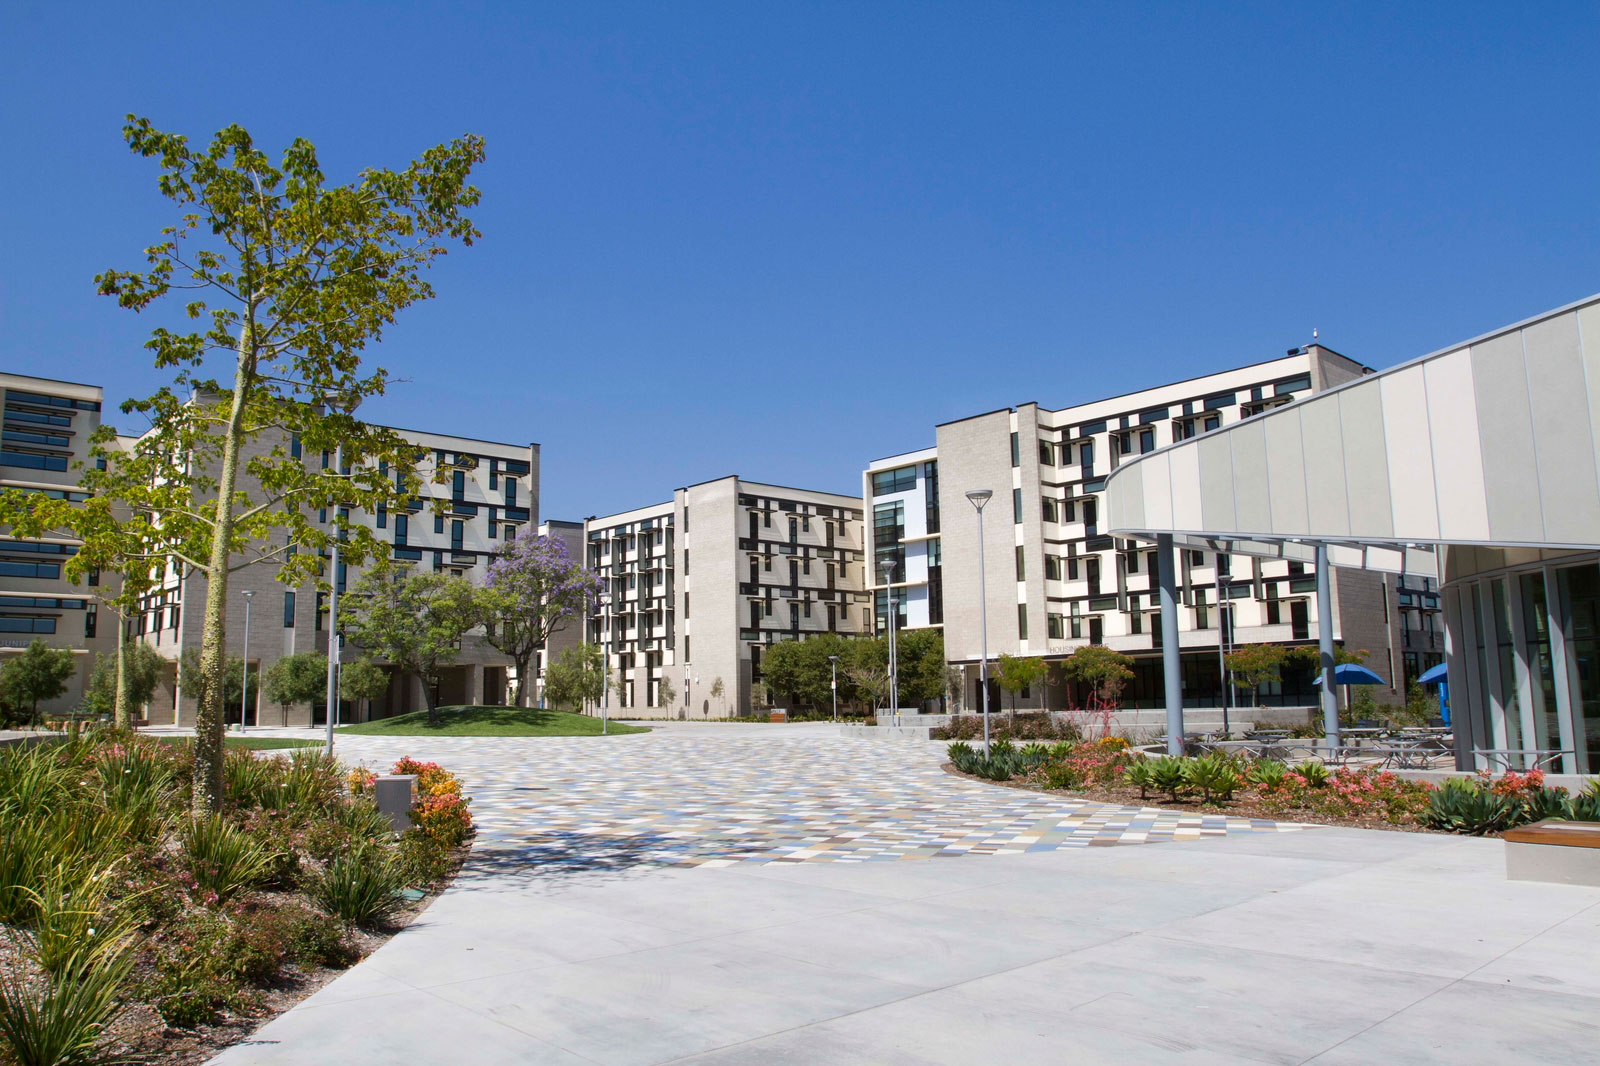 CSUF Housing during the day